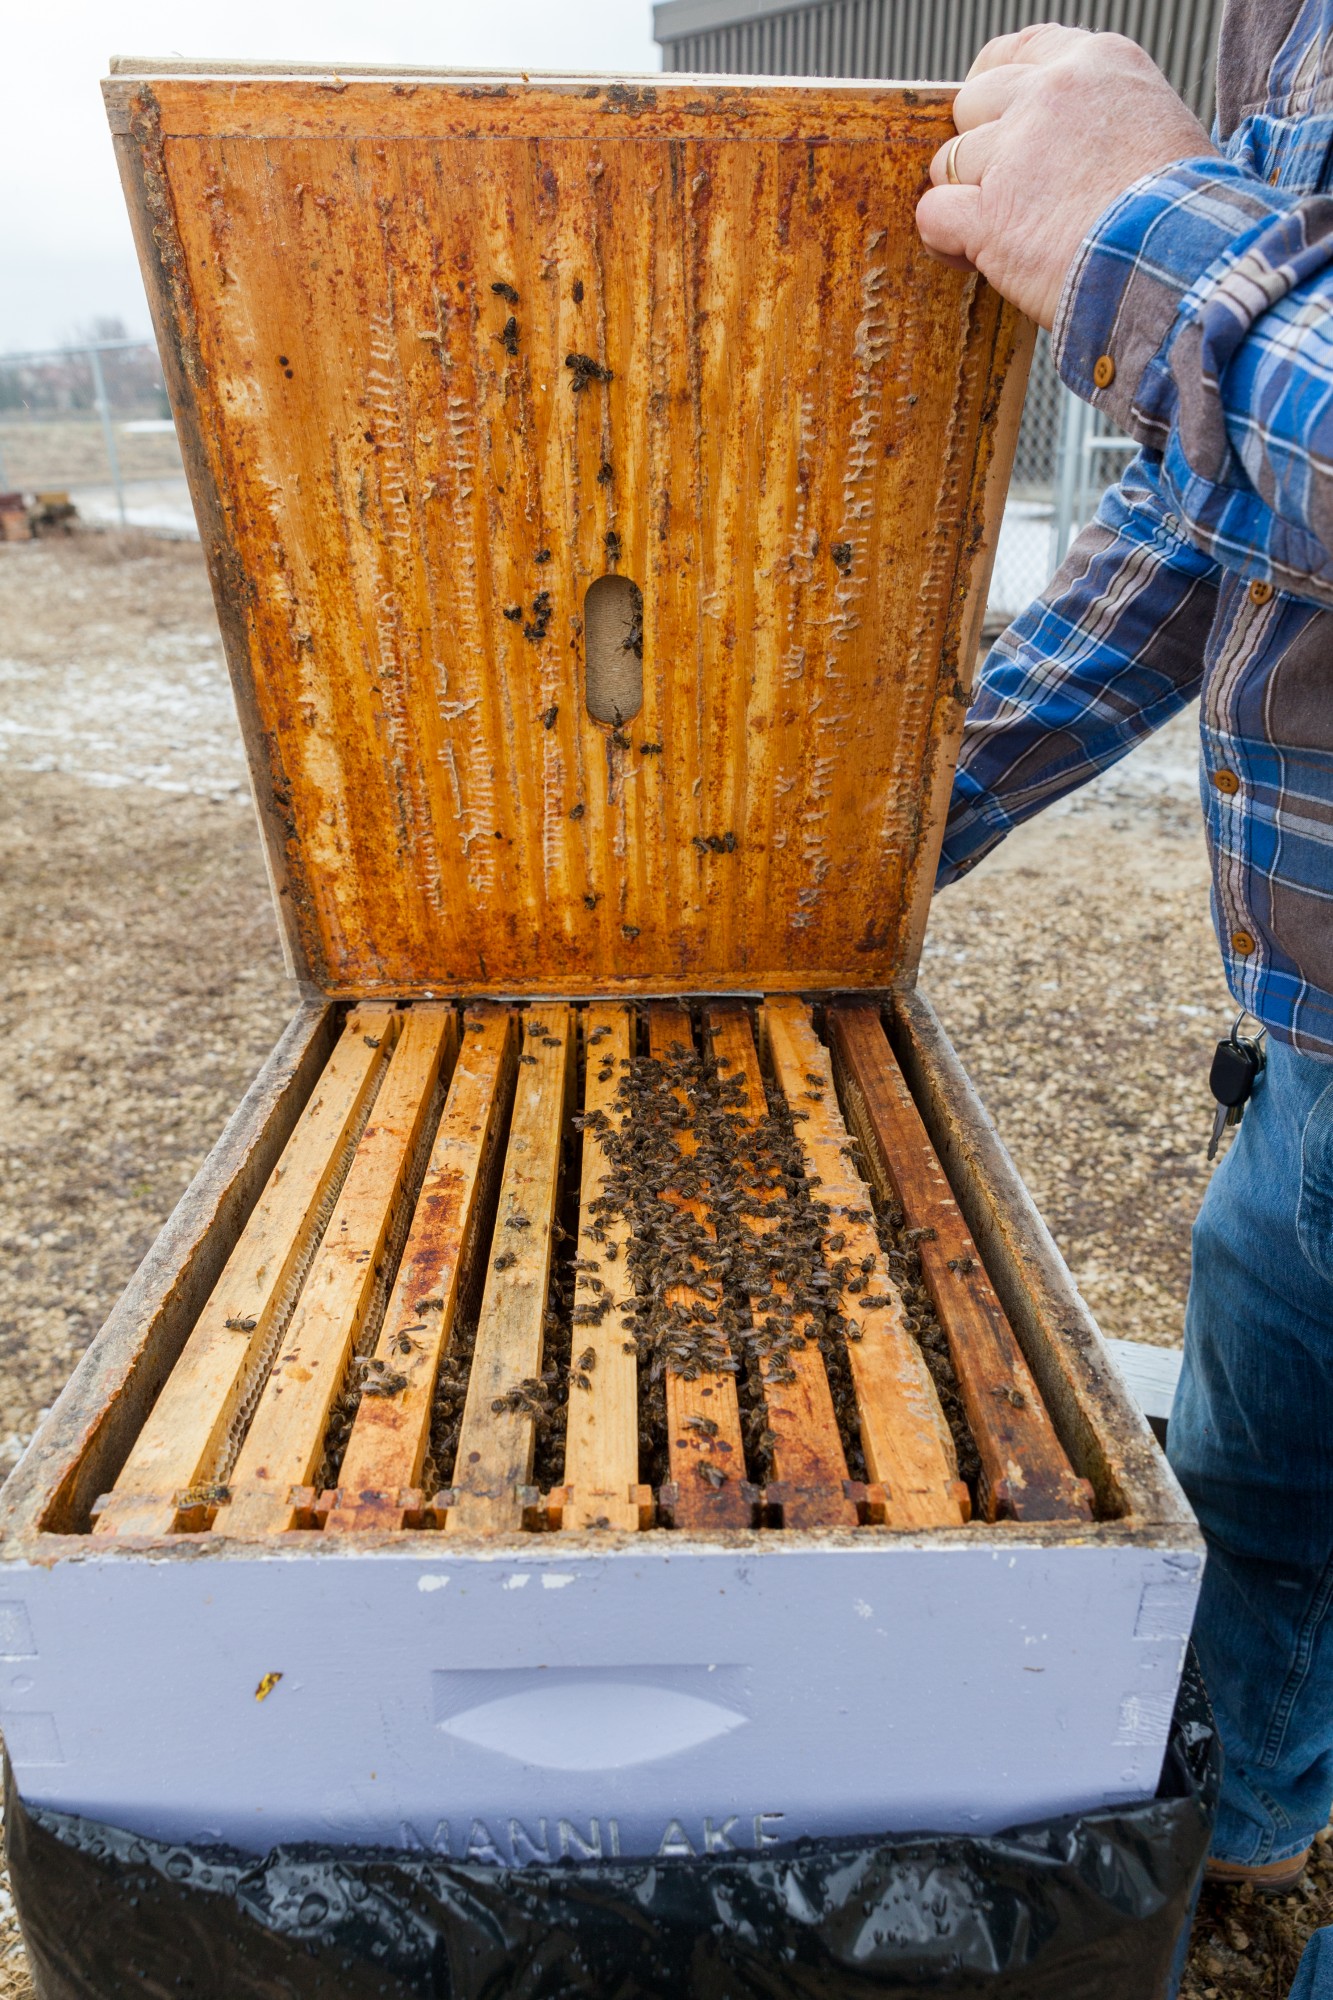 Beekeeper Gary Reuter opens a brood box to find that the bees have died at the University of Minnesota Bee Laboratory on Monday, March 16. Reuter says that a fifty percent survival rate is typical for the Universitys colonies.